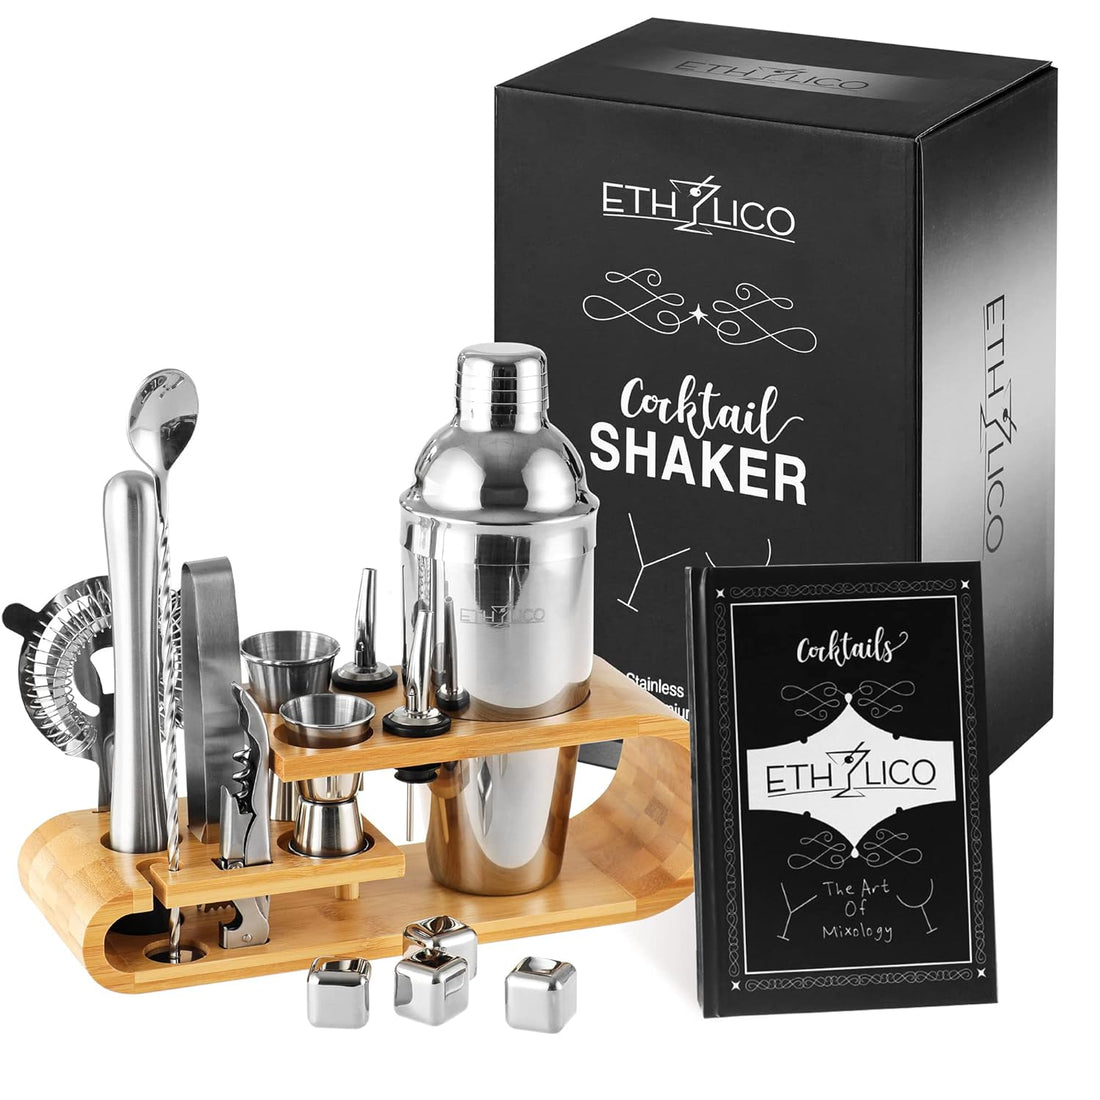 ETHYLICO Cocktail Shaker Kit | Barware Tool Set | Professional 15 piece Bartender Kit with Natural Bamboo Stand - 55 Cocktail Recipe Book Included - Silver